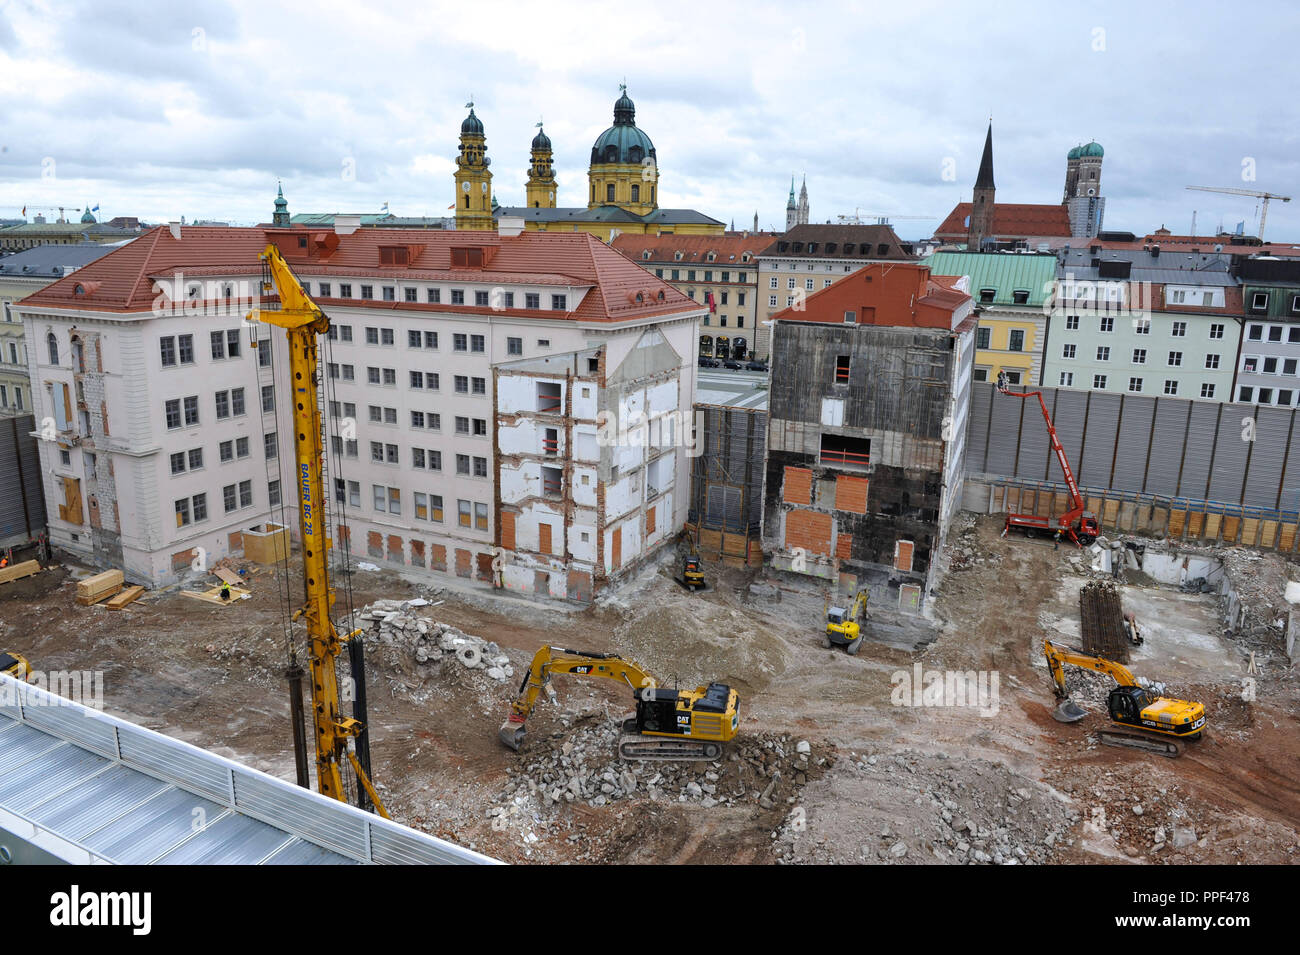 Construction site on the Siemens area at Altstadtring with view of the Wittelsbacherplatz and the Old Town. Soon here will start the construction of the new corporate headquarters. Stock Photo